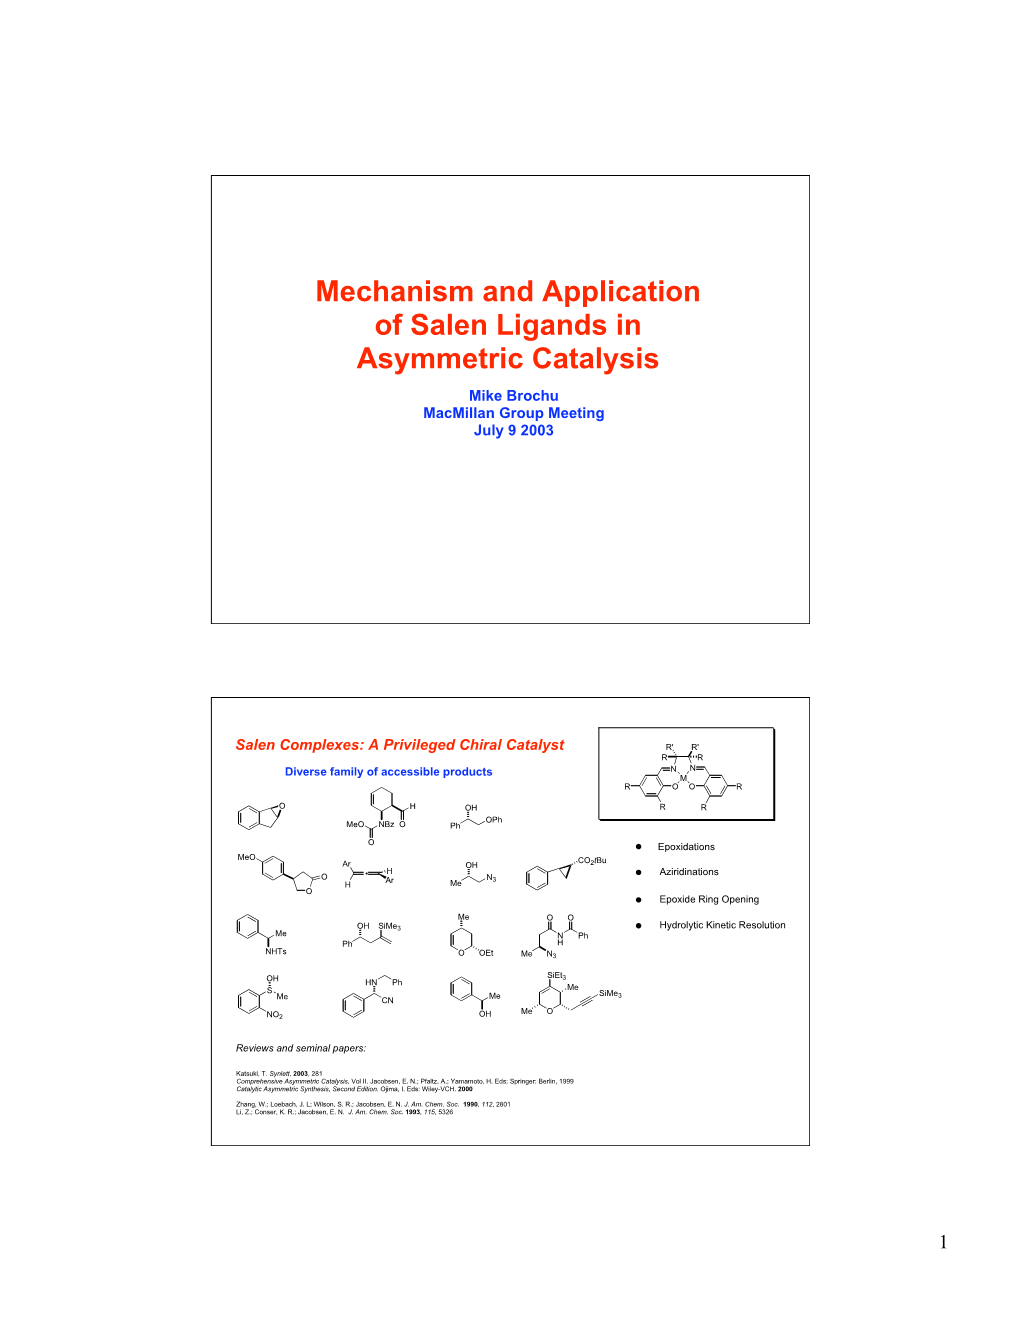 Mechanism and Application of Salen Ligands in Asymmetric Catalysis Mike Brochu Macmillan Group Meeting July 9 2003